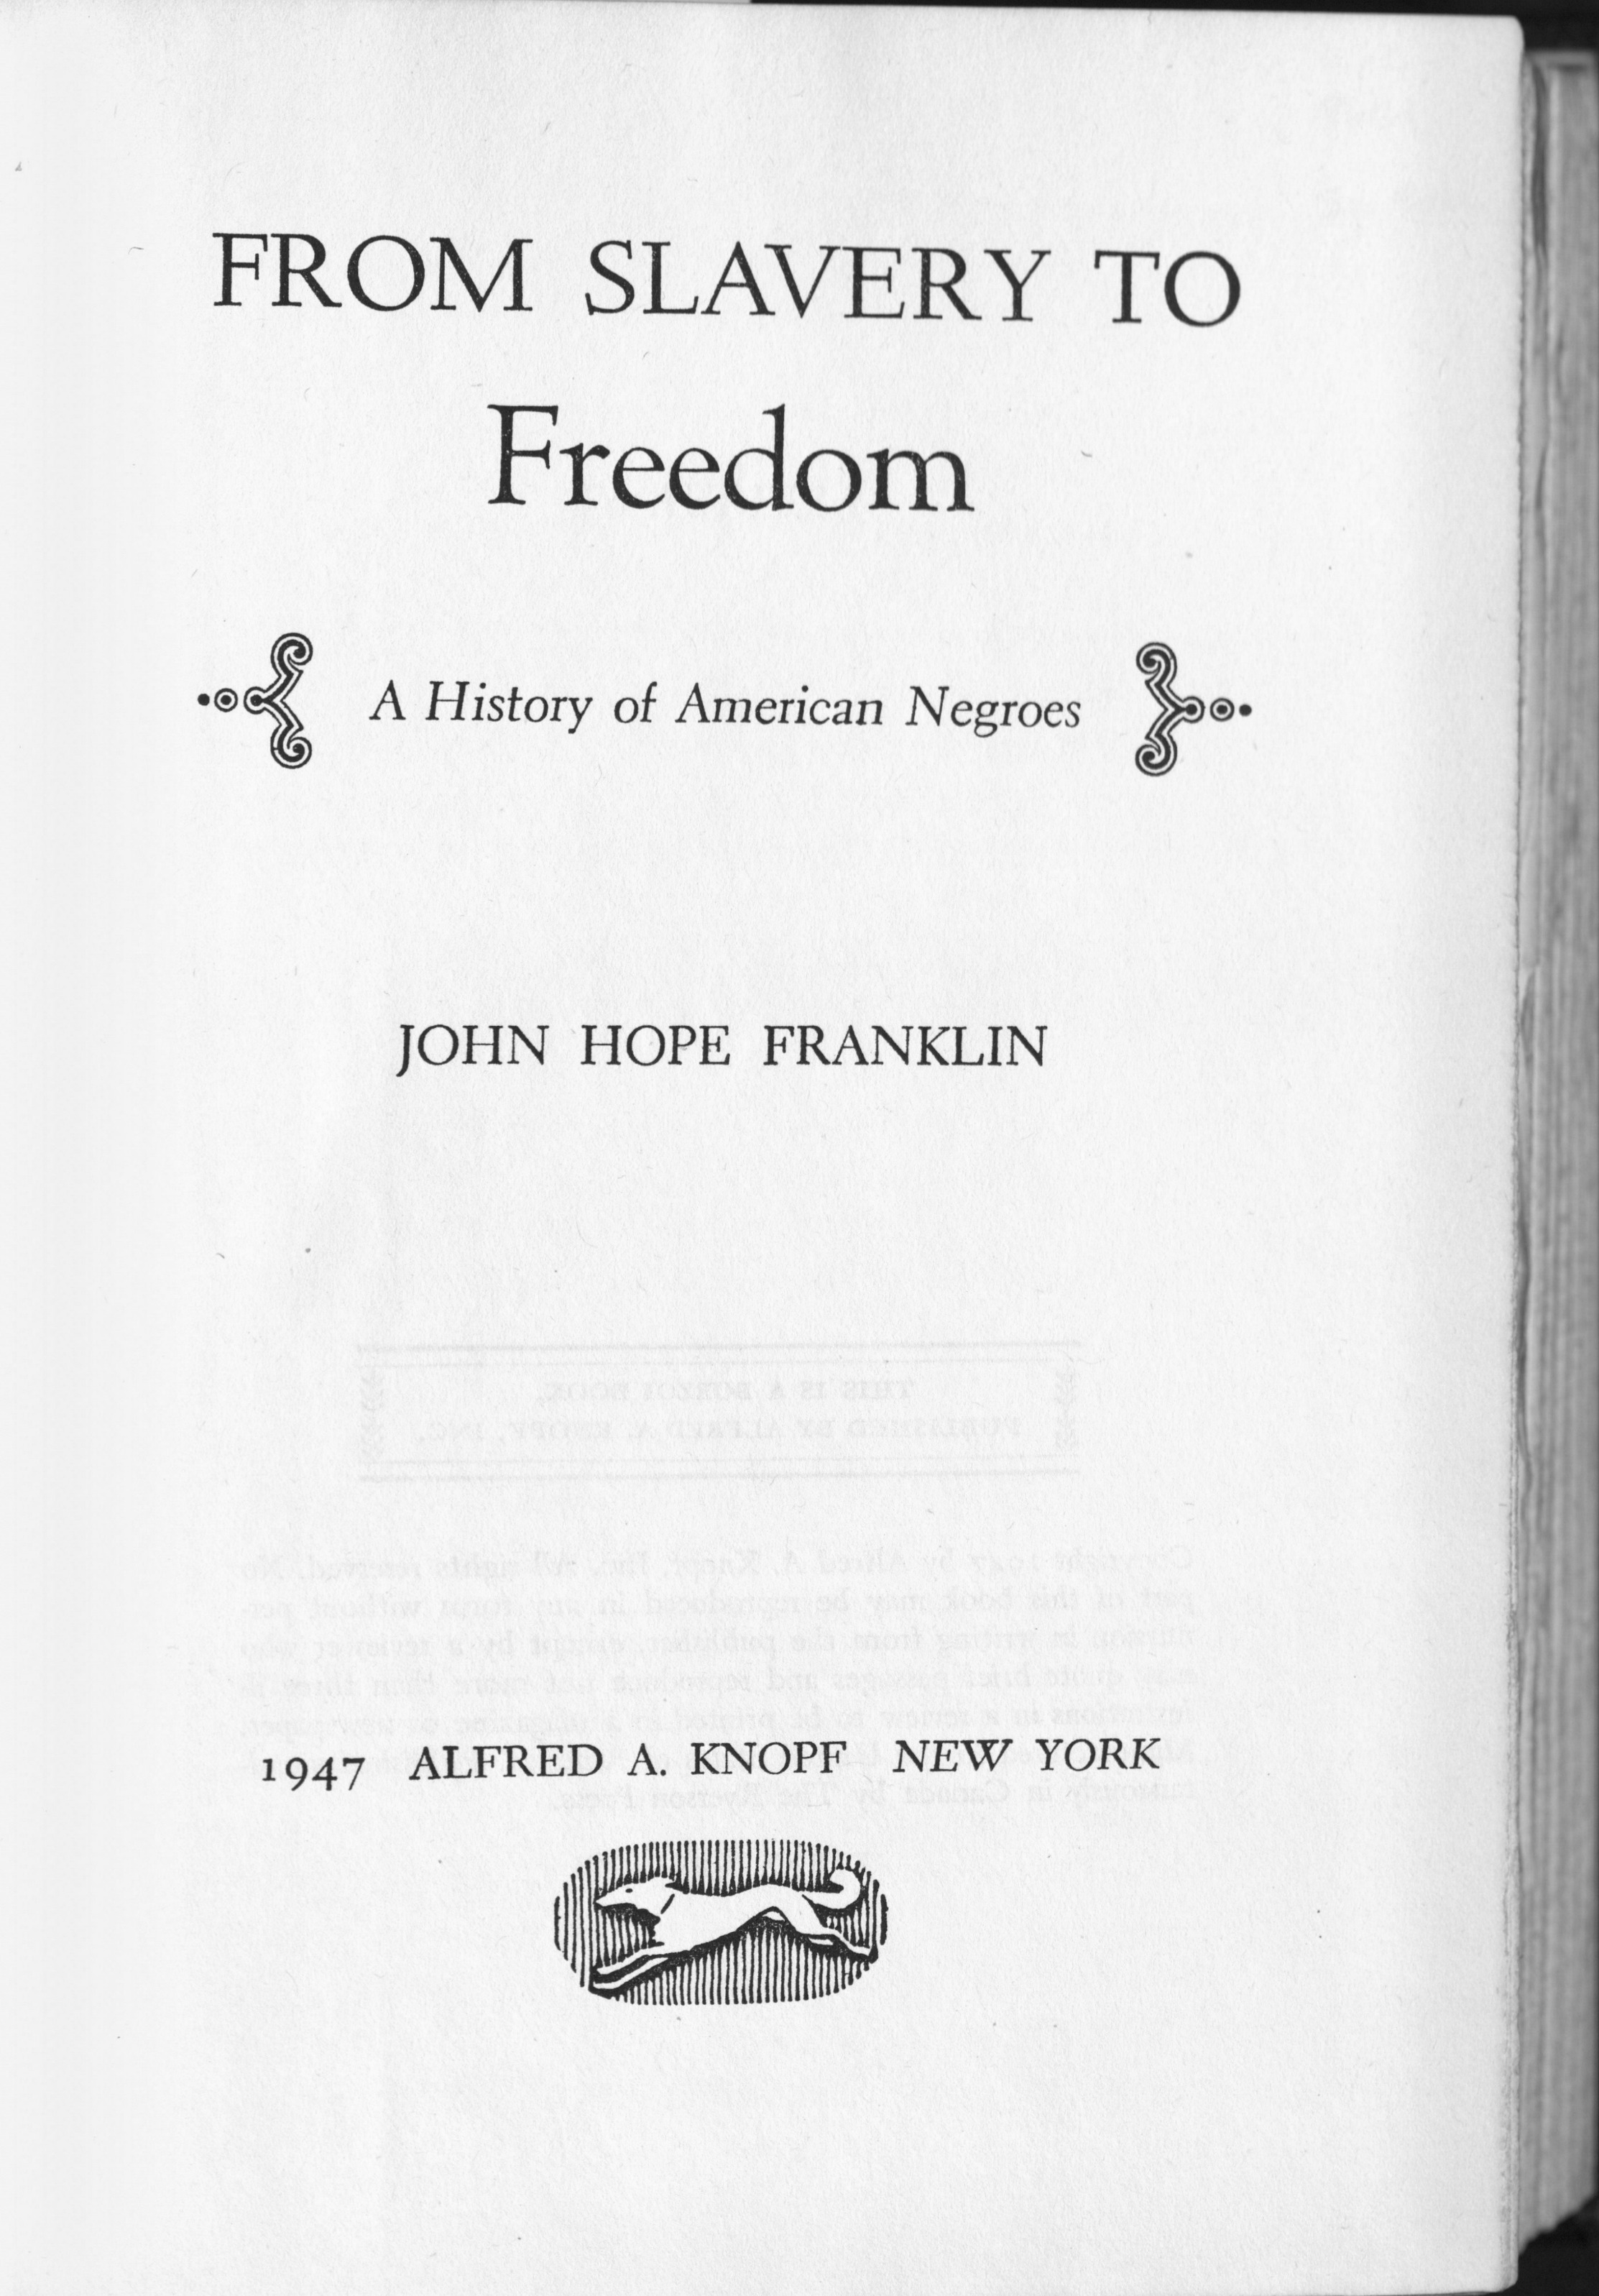 the book of negroes essay